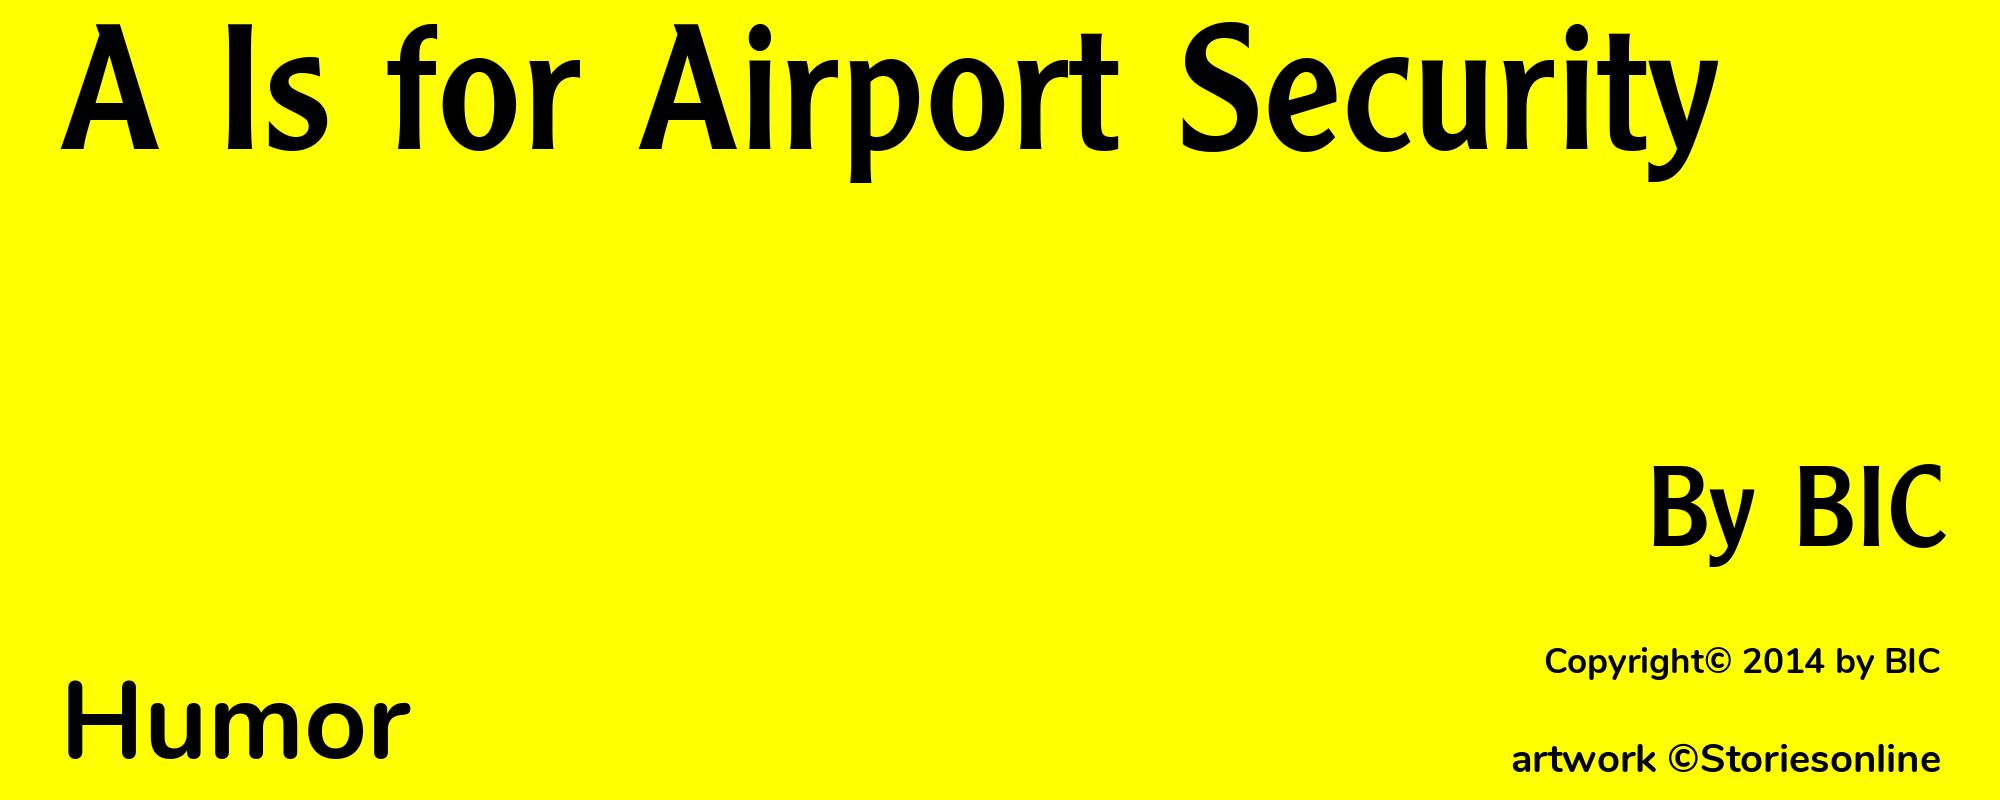 A Is for Airport Security - Cover